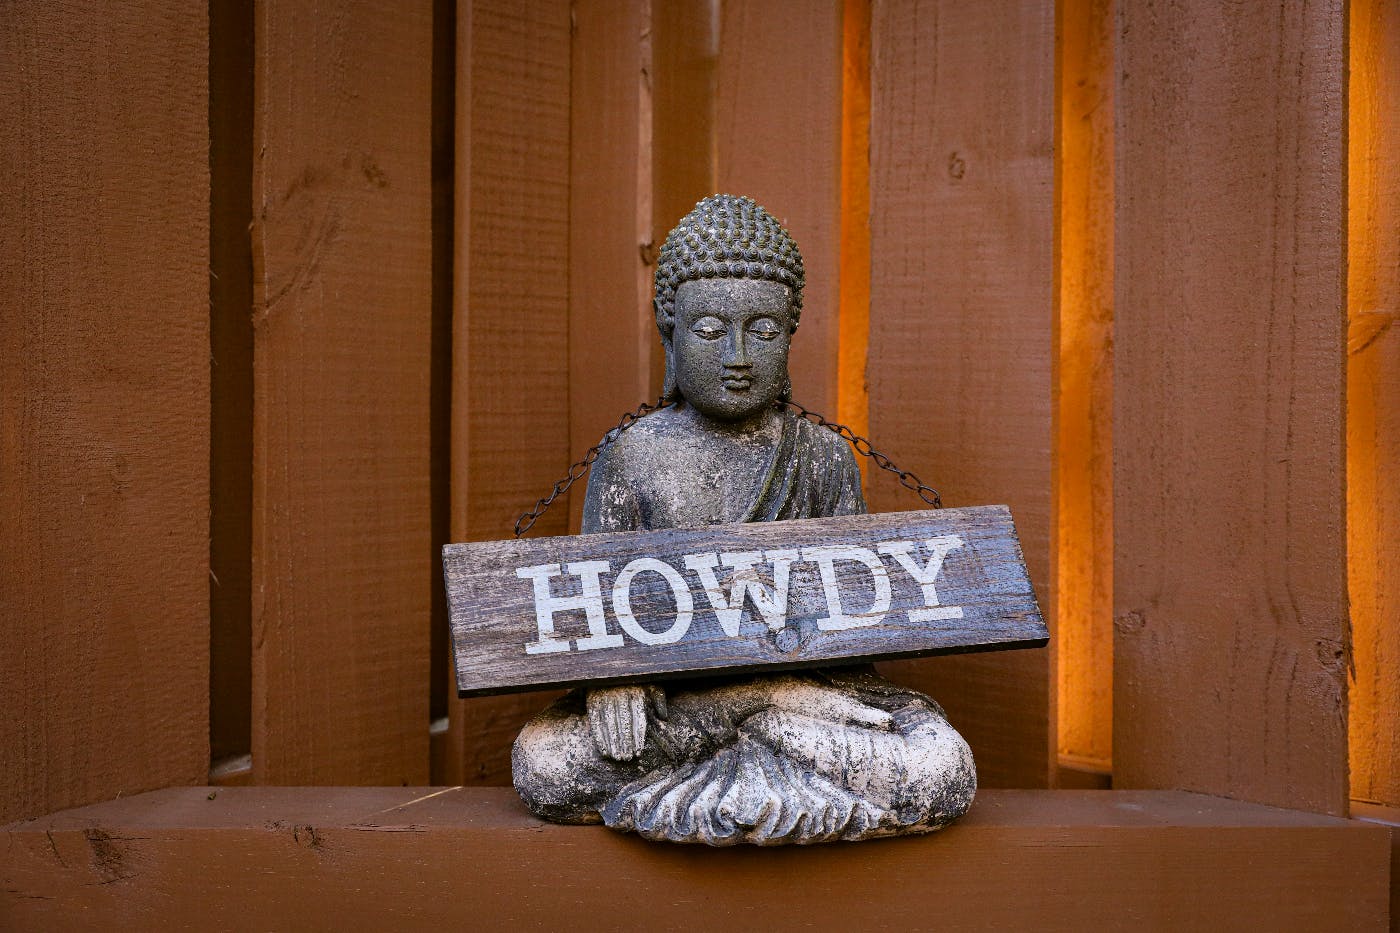 A seated Buddha statue with a wood sign hanging on it reading "Howdy"